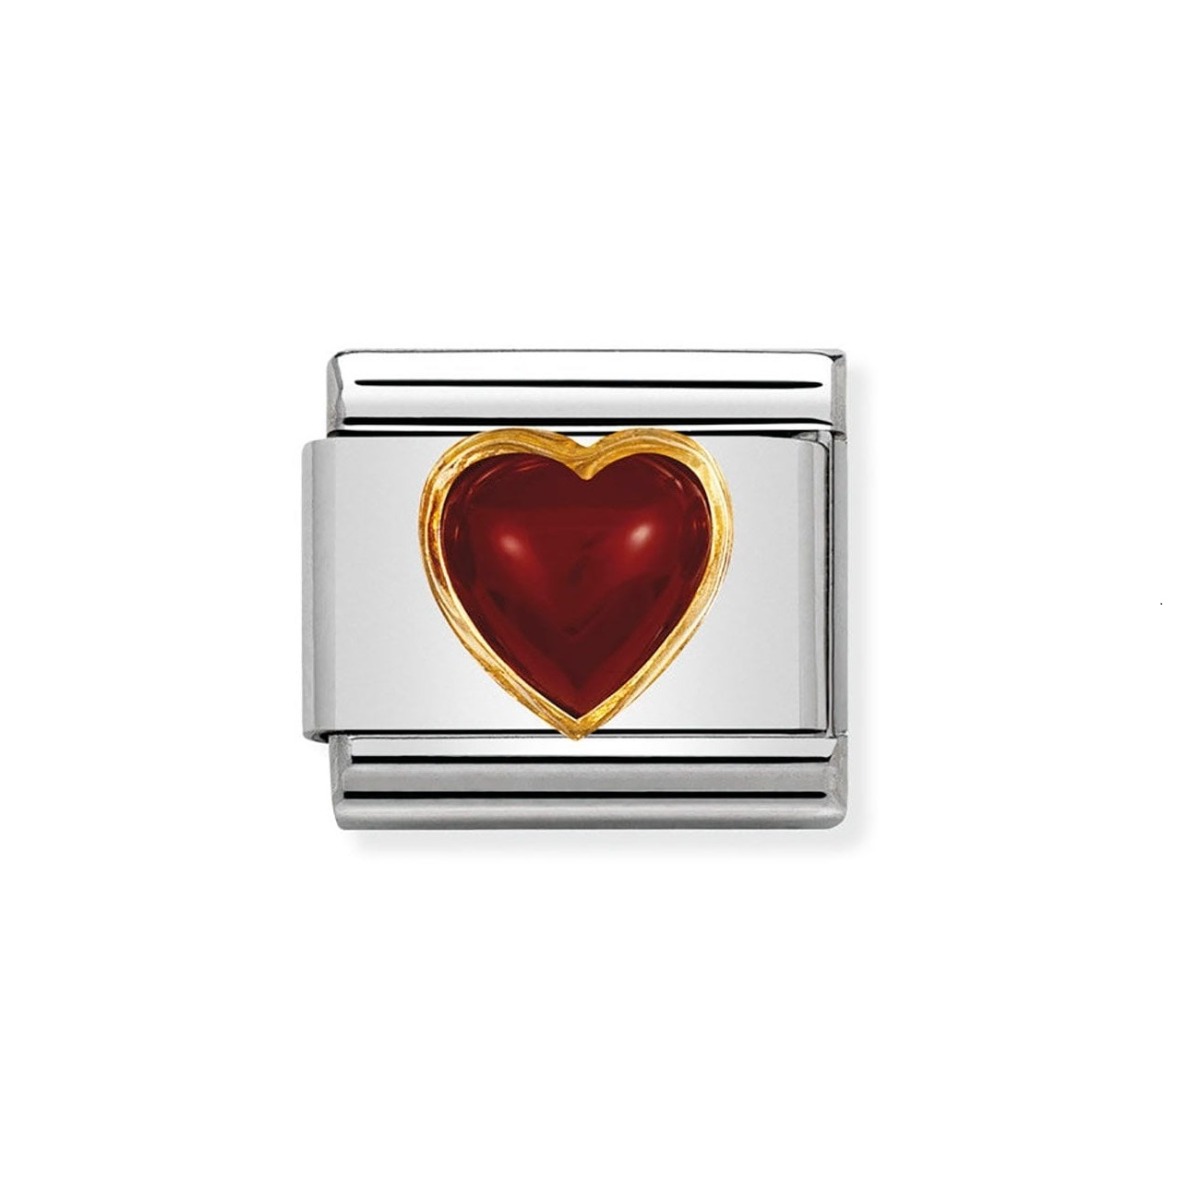 Nomination Classic Stones Heart Charm - 18k Gold with Red Agate